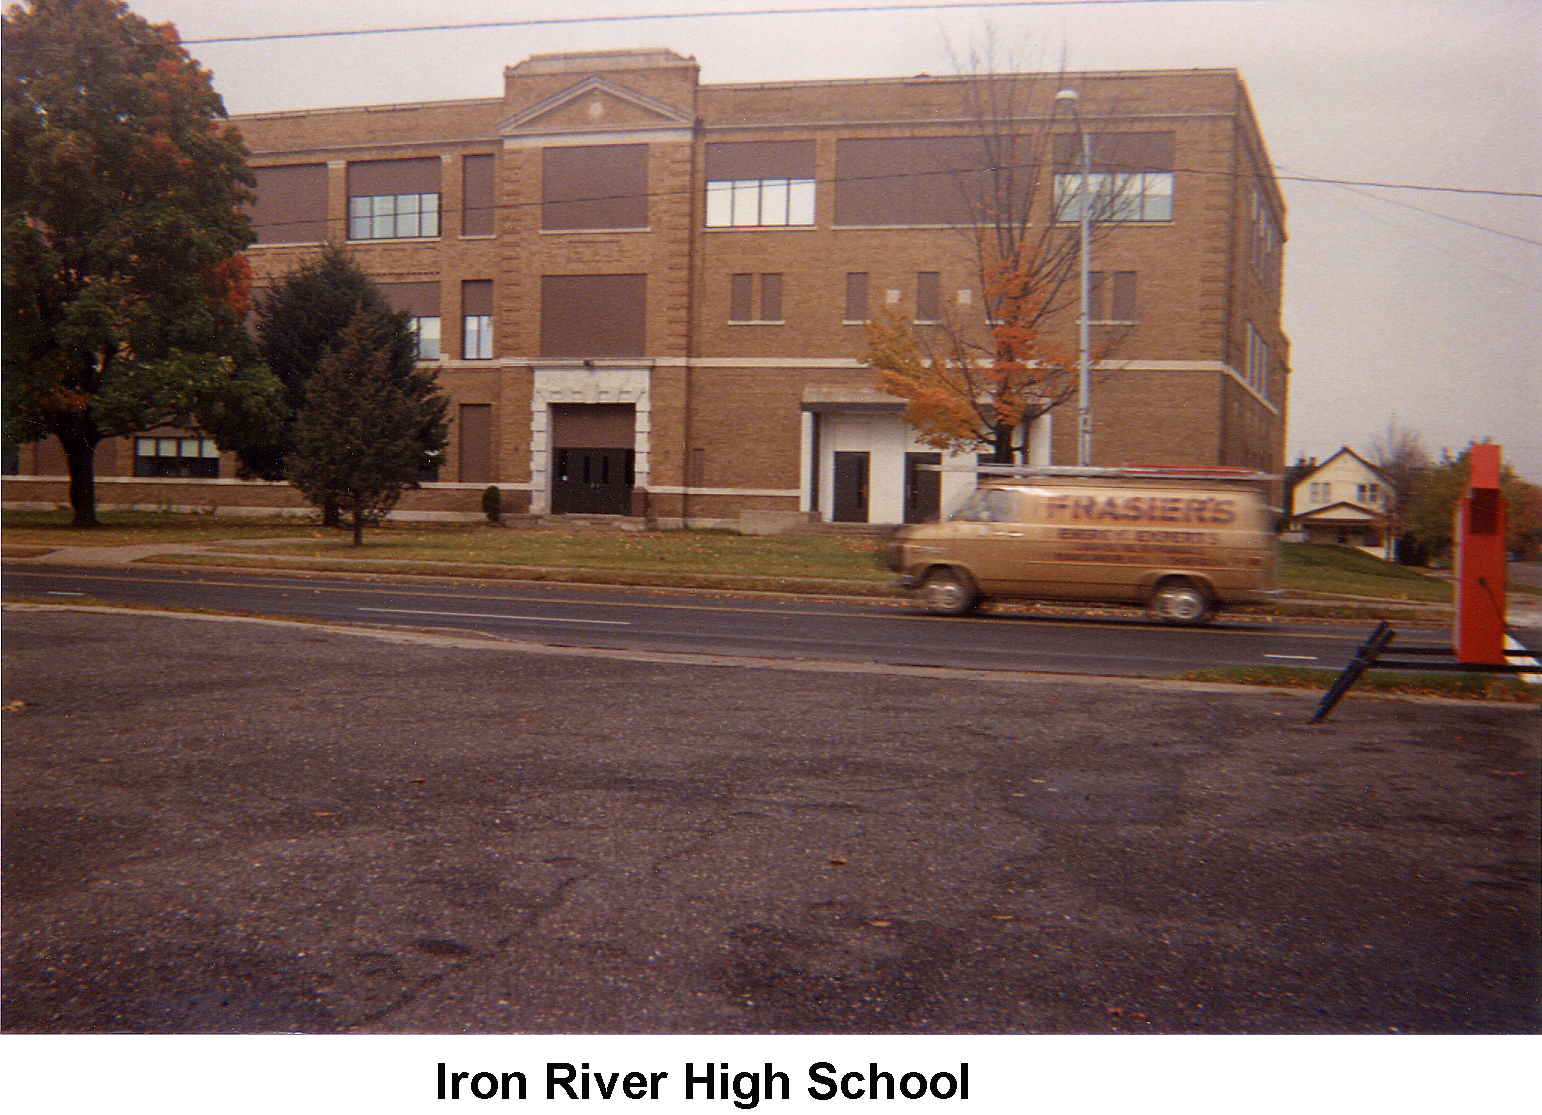 Iron River High School is three stories high and brick.